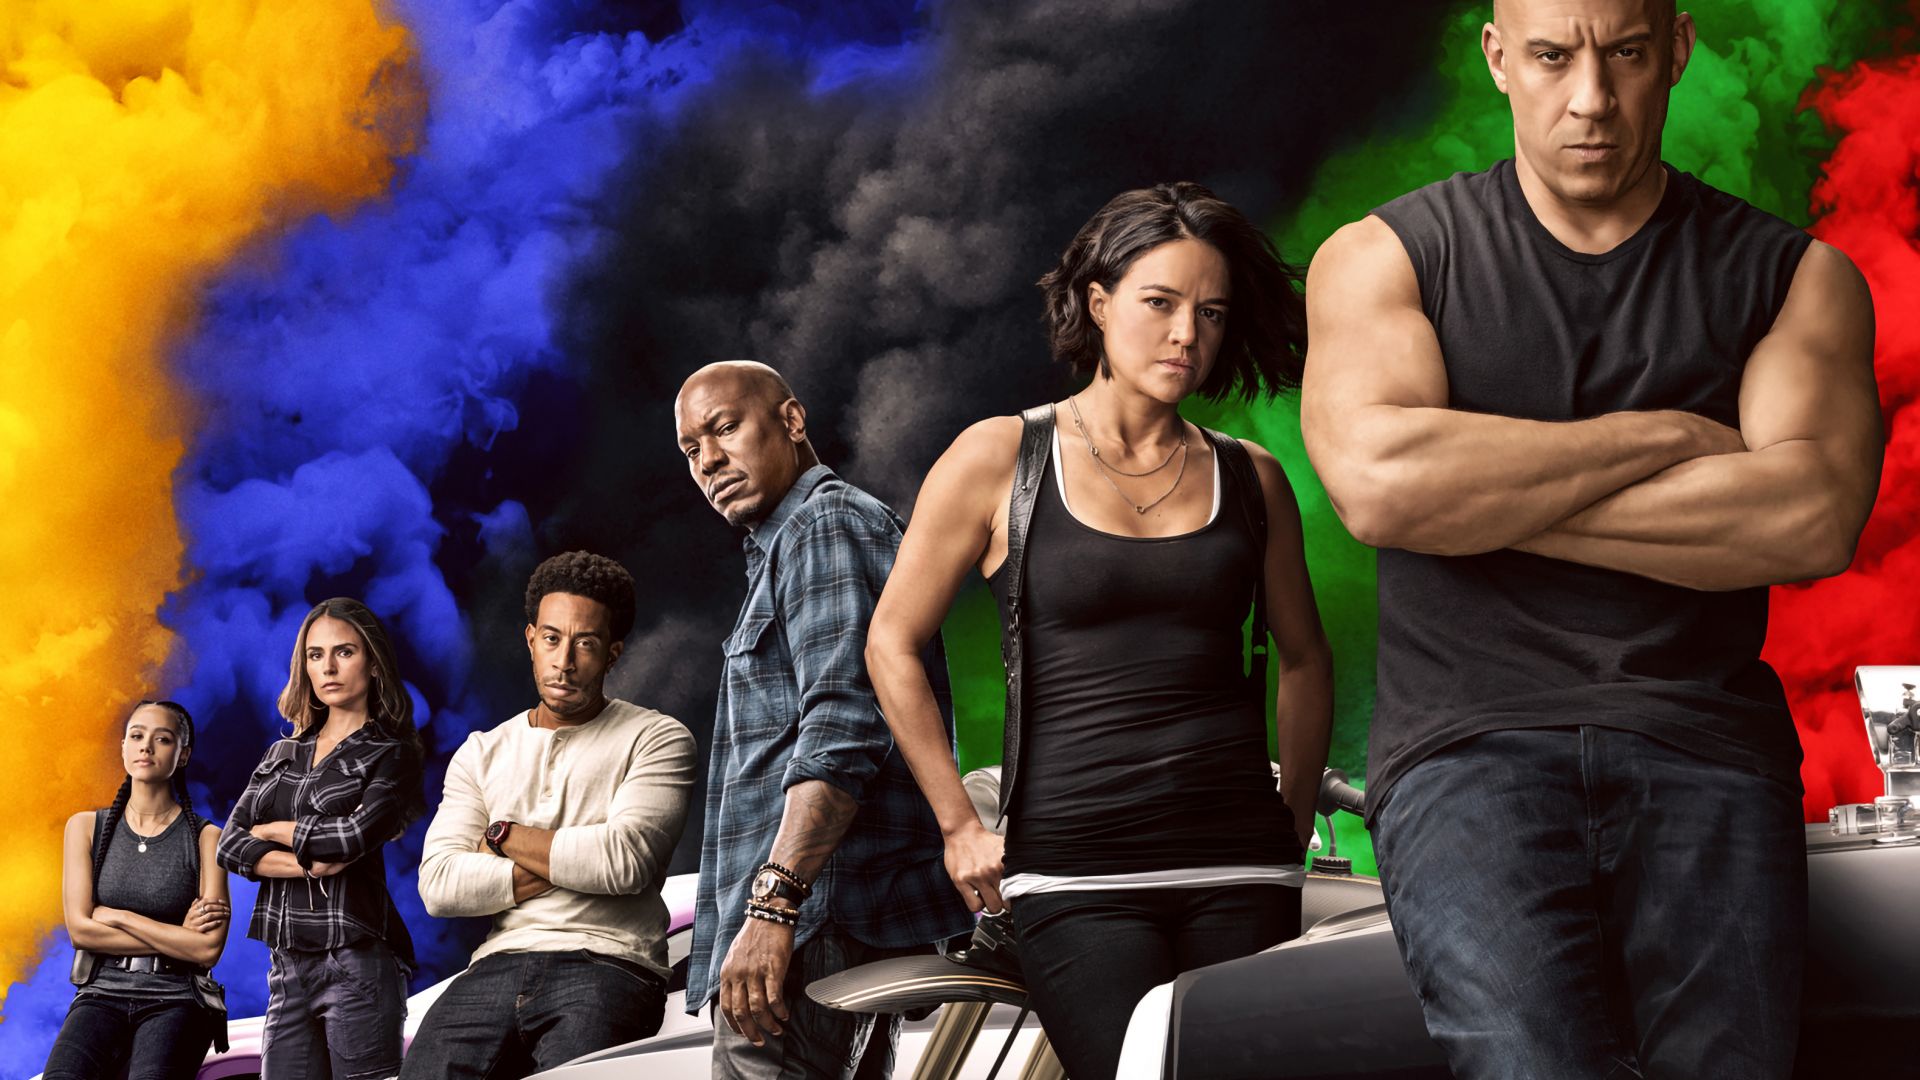 Desktop wallpaper movie cast, fast & furious HD image, picture, background, f70159